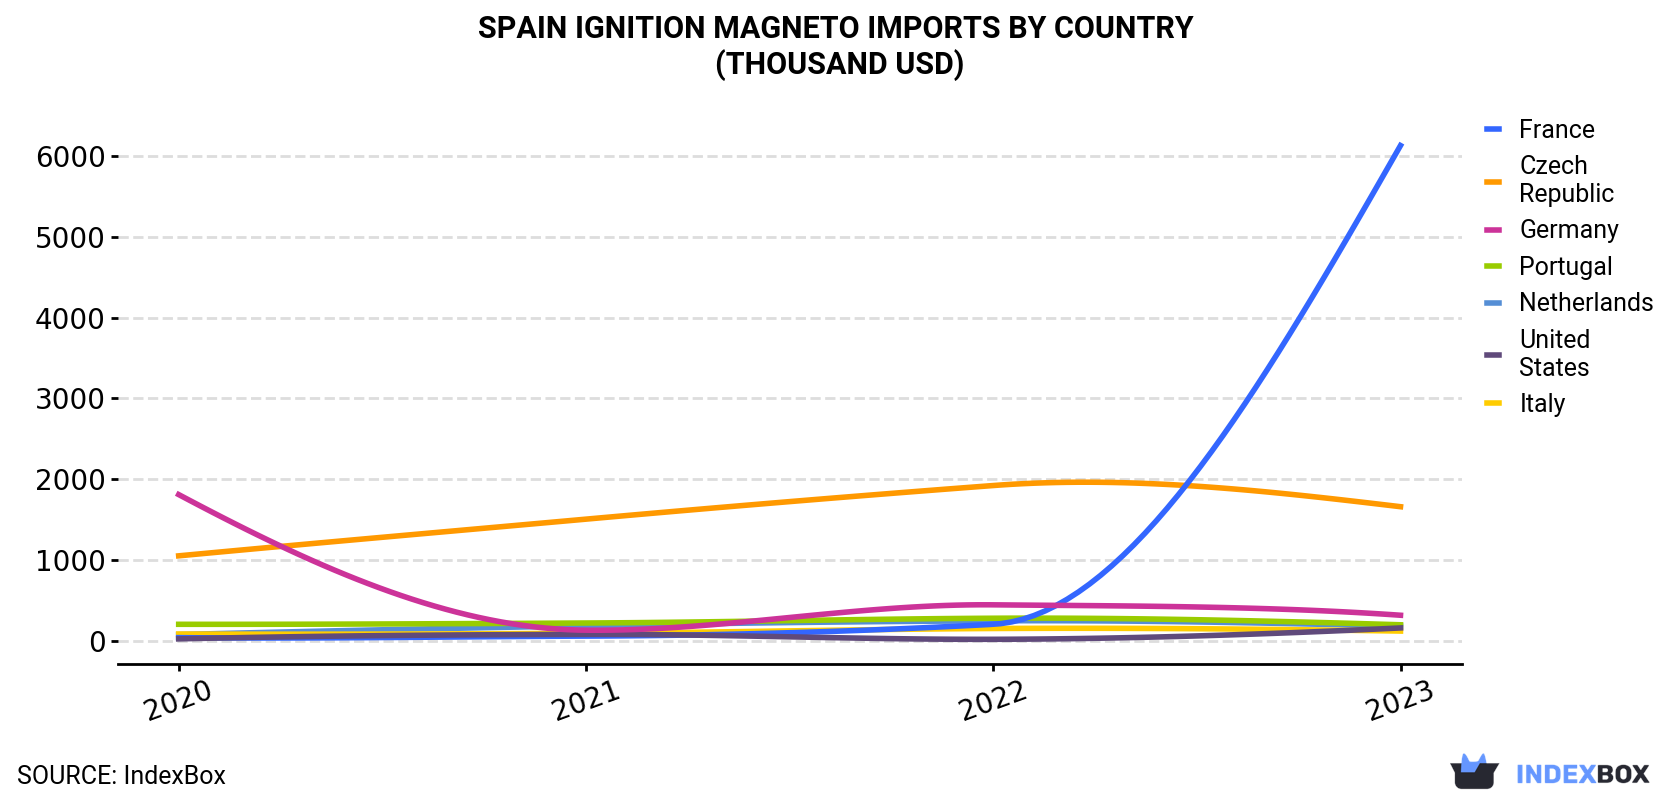 Spain Ignition Magneto Imports By Country (Thousand USD)